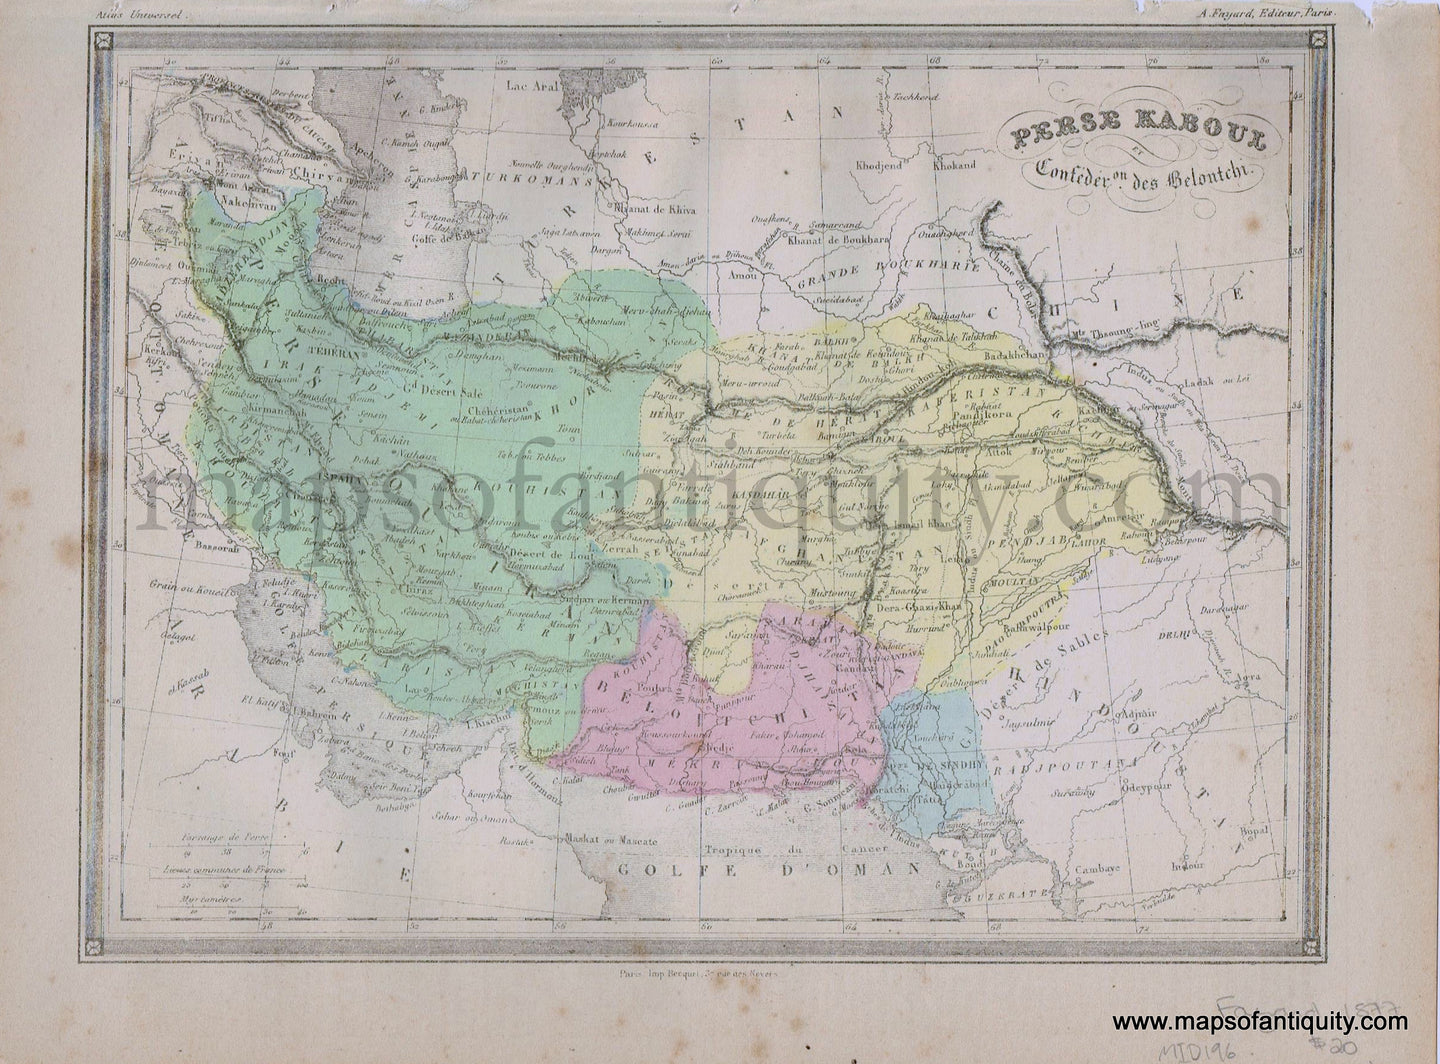 Antique-Printed-Color-Map-Middle-East-&-Holy-Land-Perse-Kaboul-et-Confeder.-Des-Beloutchi---Iran-Afghanistan-Pakistan-1877-Fayard--1800s-19th-century-Maps-of-Antiquity